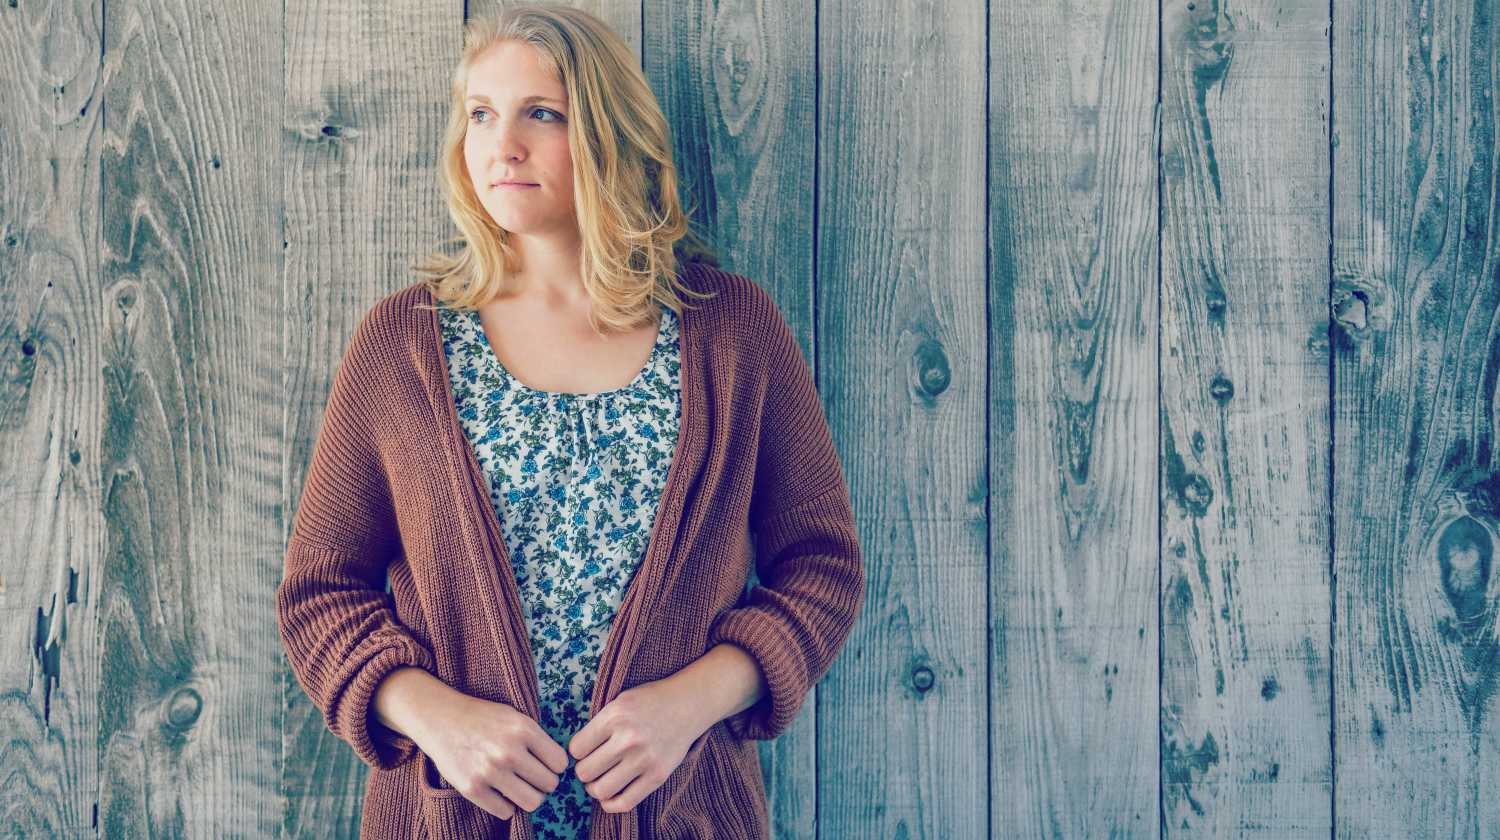 https://robemart.com/blog/wp-content/uploads/2019/08/56KSIaV6lU4-woman-wearing-brown-cardigan-leaning-on-wooden-wall-comfy-clothes-us-Featured.jpg